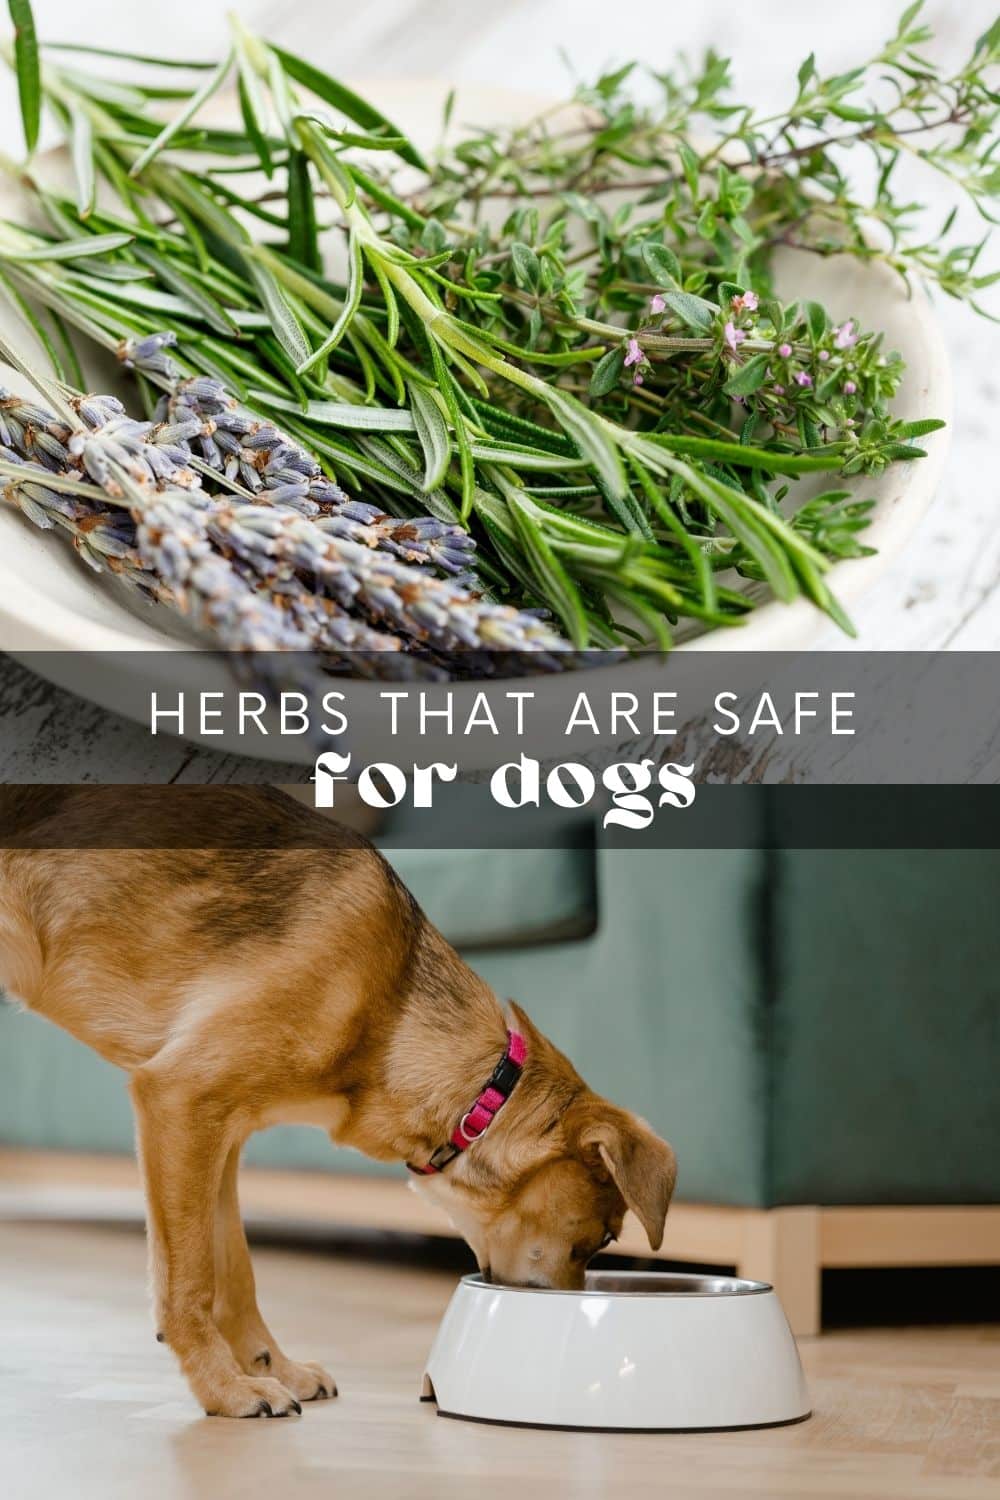 Dogs are not just pets; they're part of the family! And like any family member, we want to ensure they're healthy and cared for. Just as we do with our own bodies, it's important to pay attention to what our dogs ingest. Many plants and foods are unsafe for dogs and can cause serious health issues.